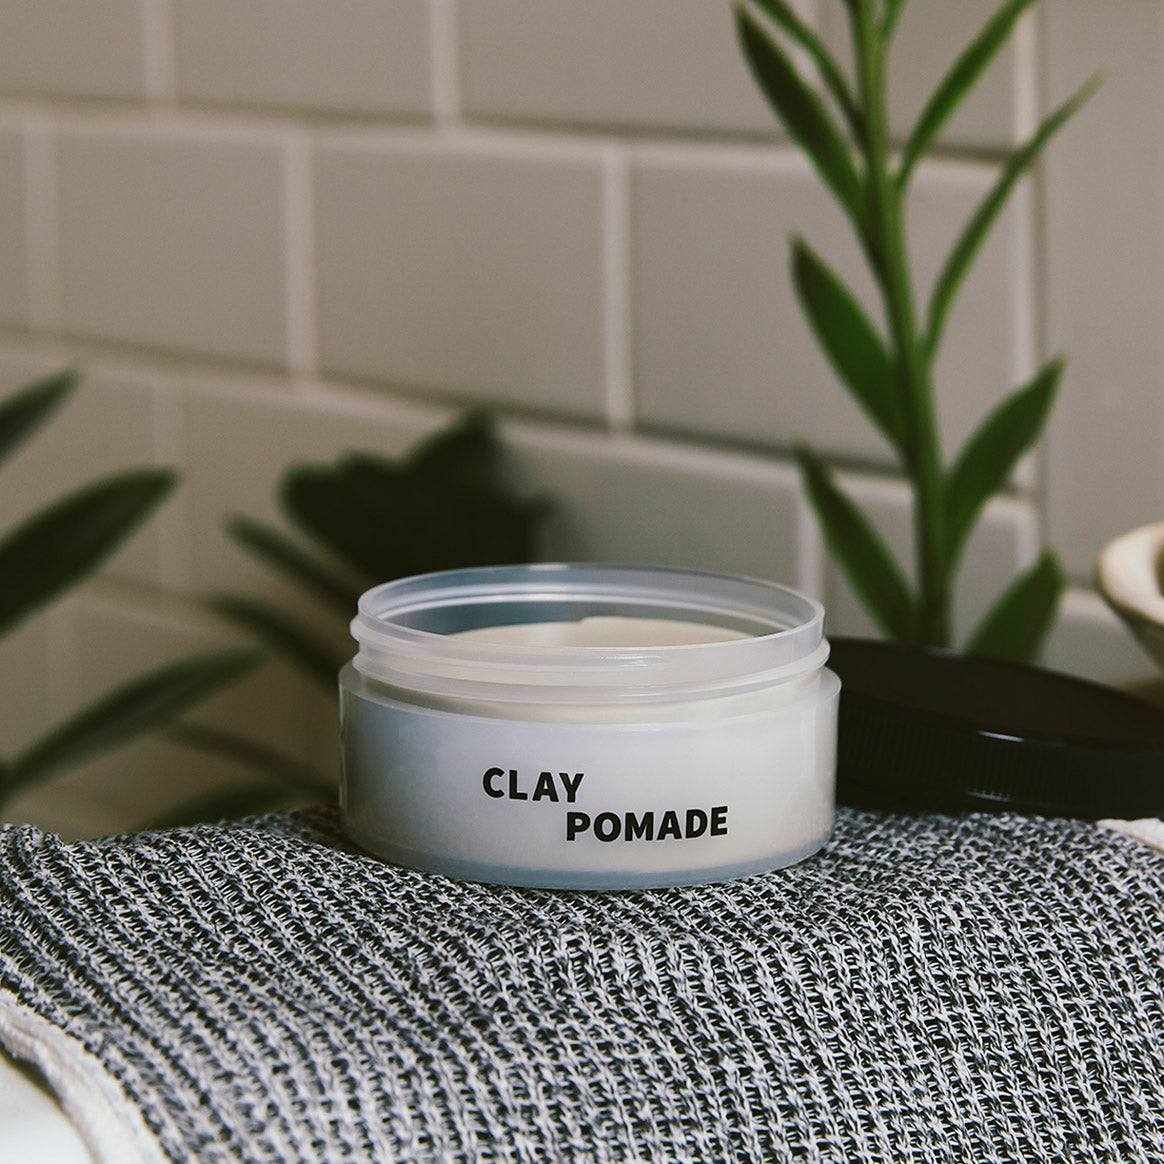 Open jar of Clay Pomade on towel on a sink with plants in the background